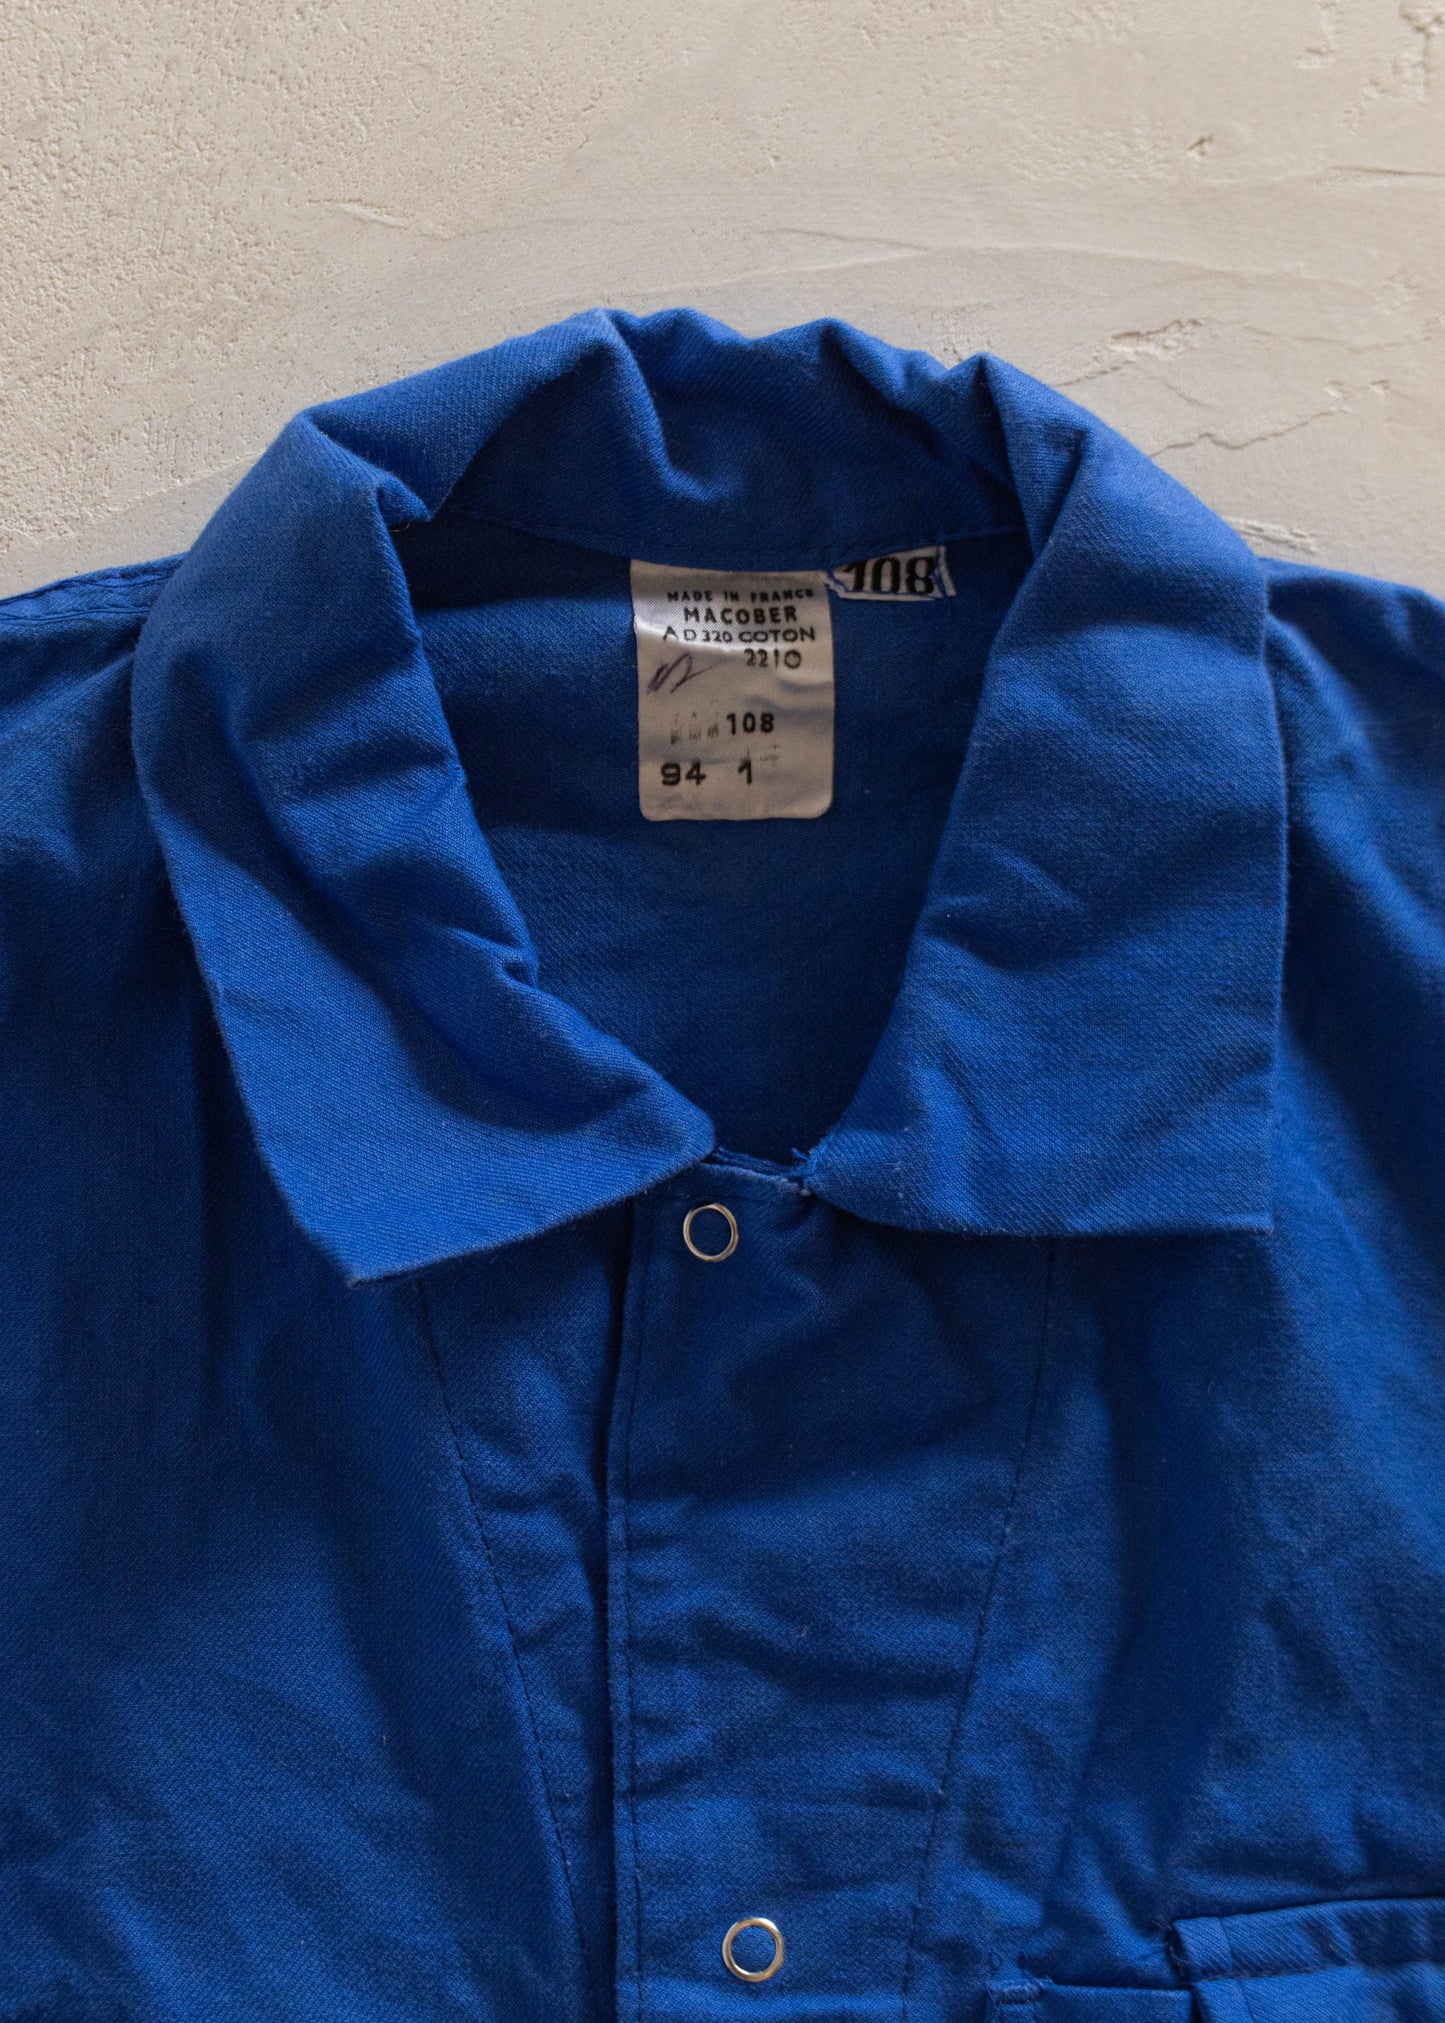 1980s Macober French Workwear Snap Button Chore Jacket Size M/L